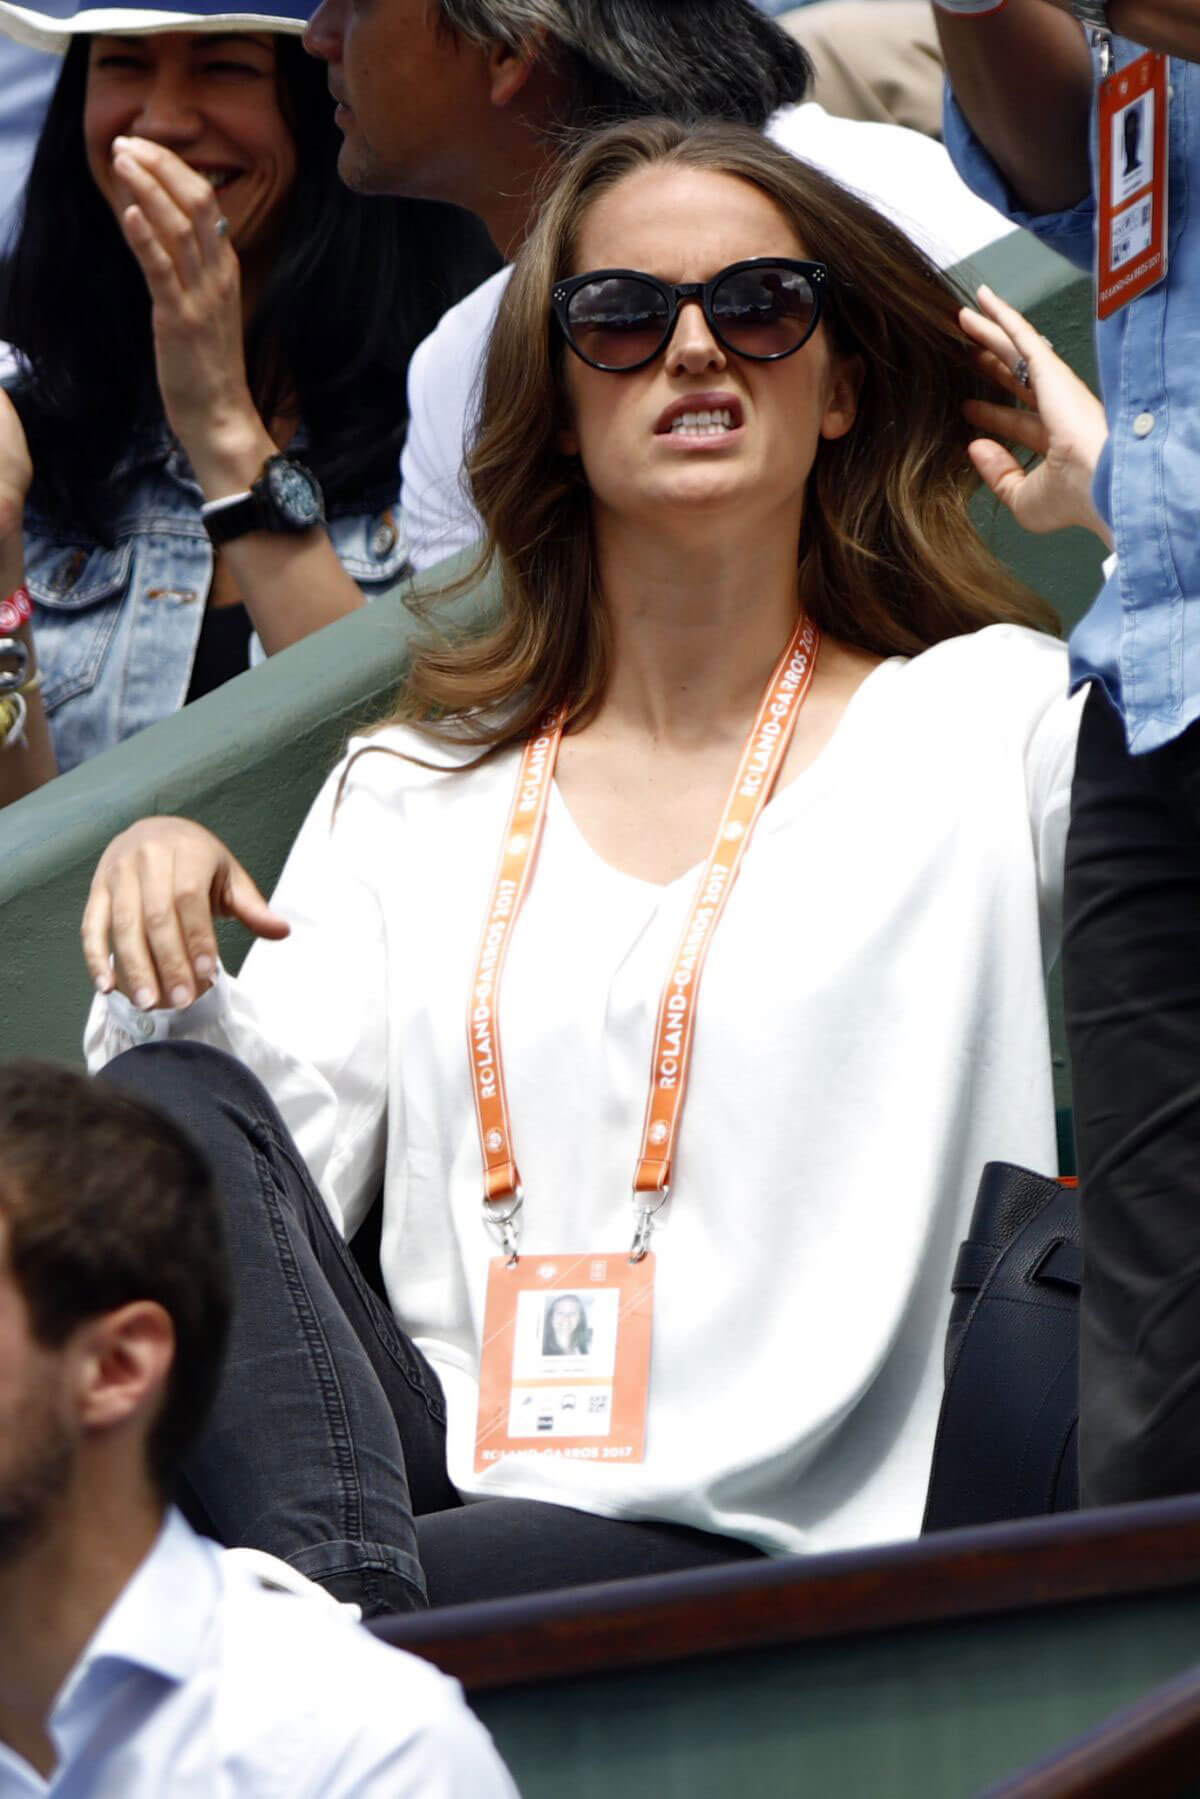 Kim Sears at 2017 French Open Roland Garros in Paris